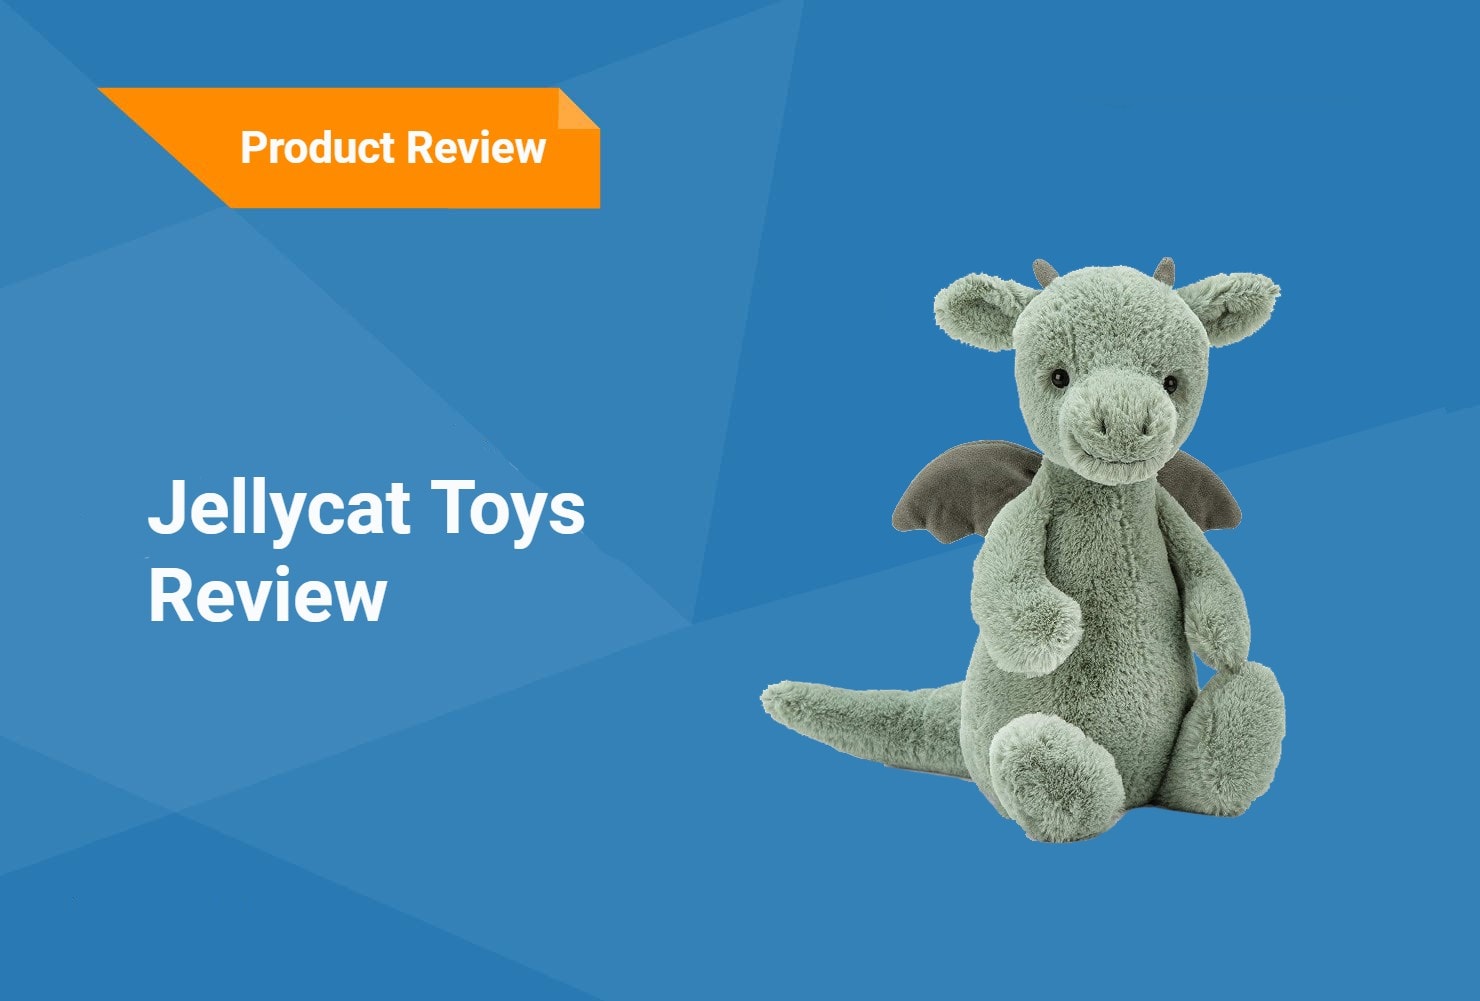 jellycat toys Review